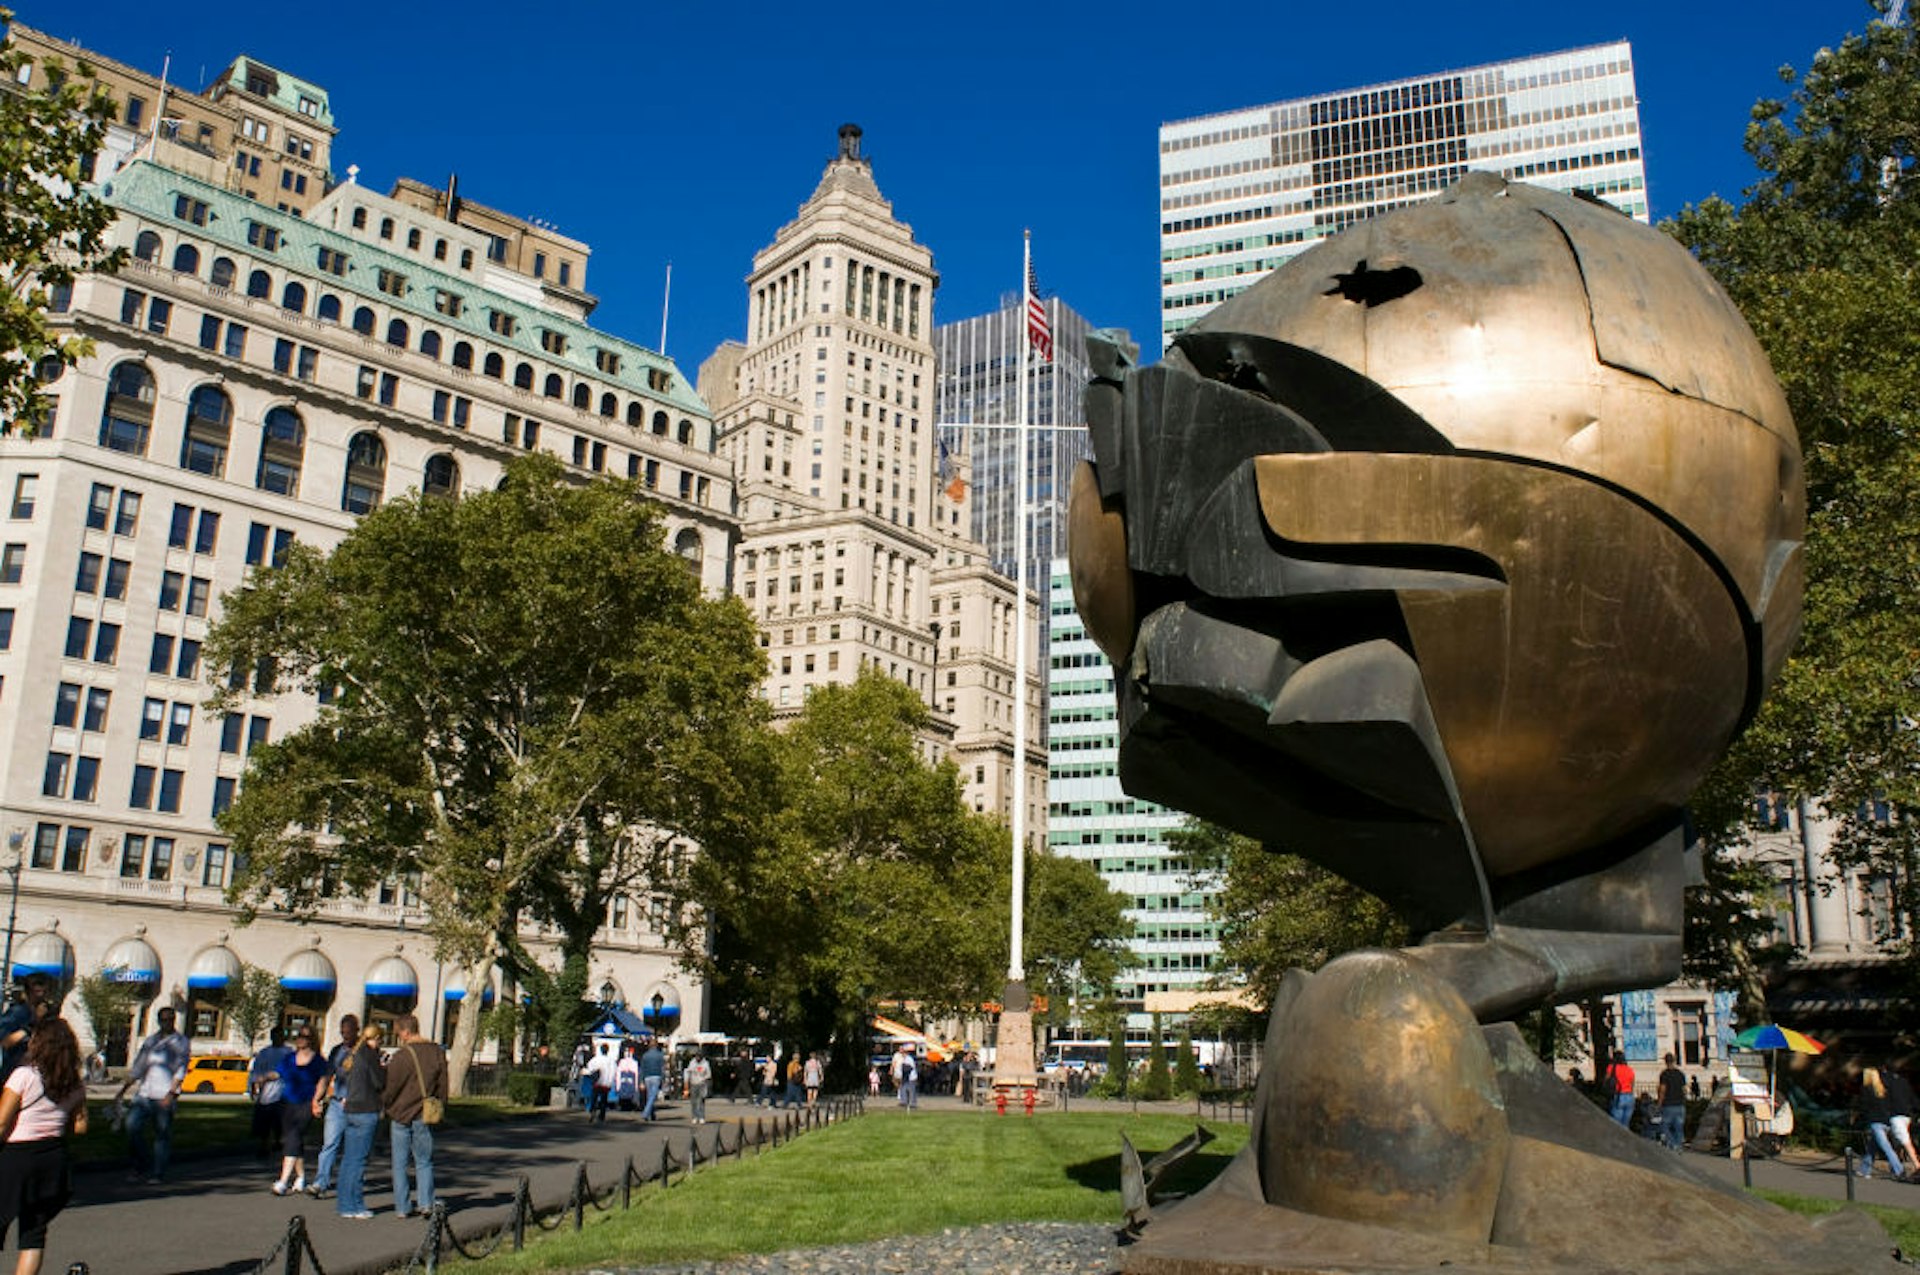 The Sphere in Battery Park City, 2013